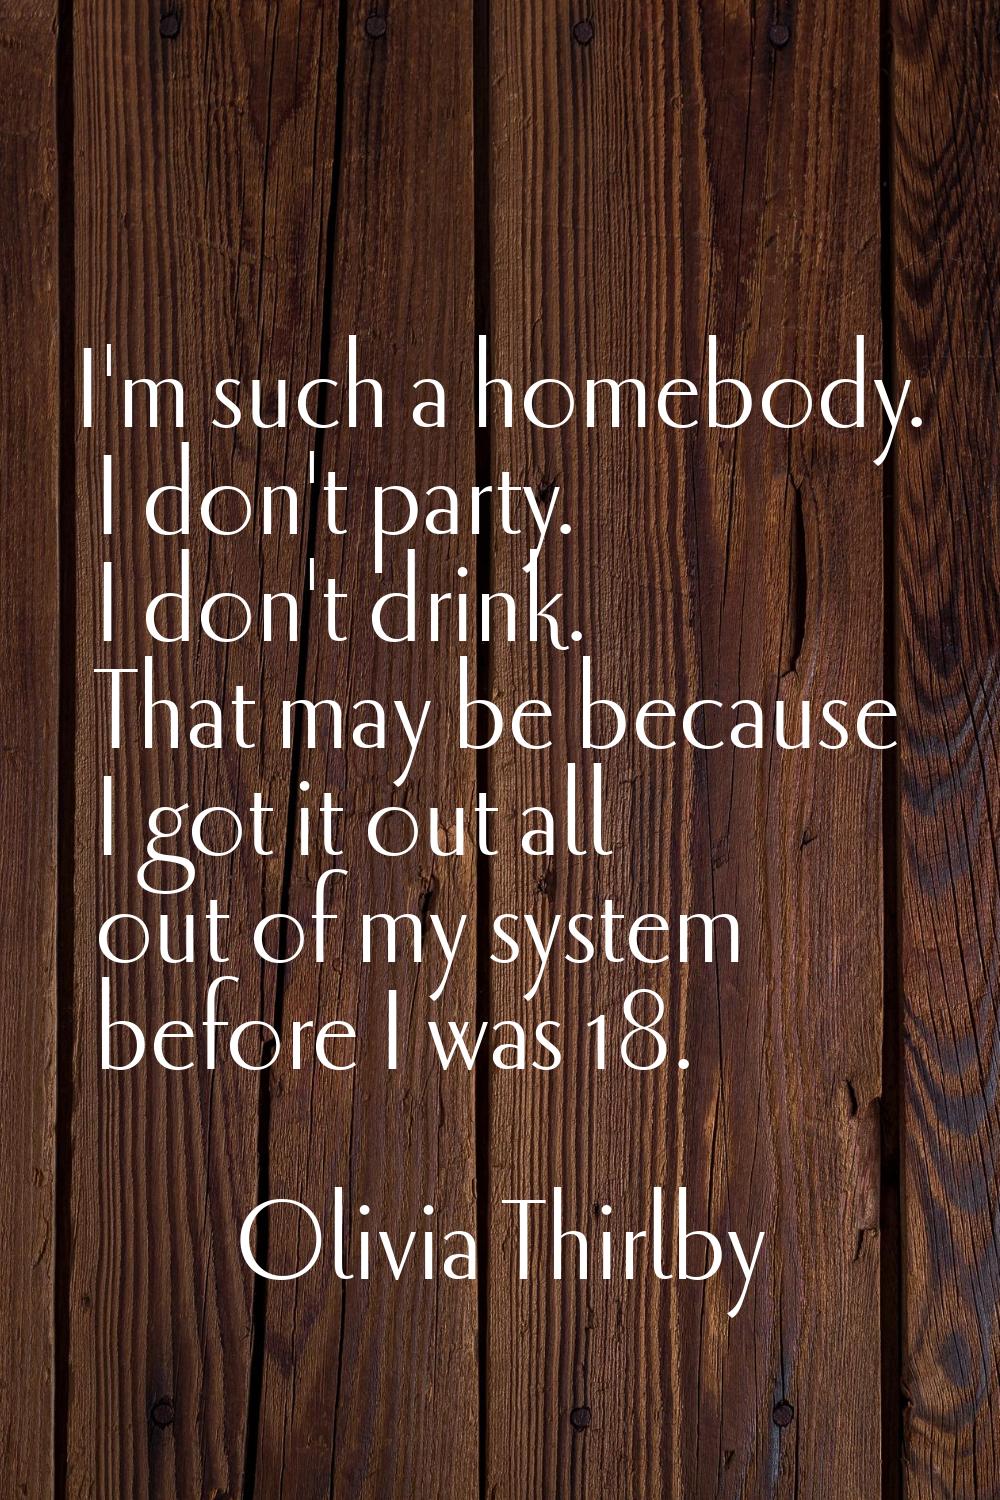 I'm such a homebody. I don't party. I don't drink. That may be because I got it out all out of my s